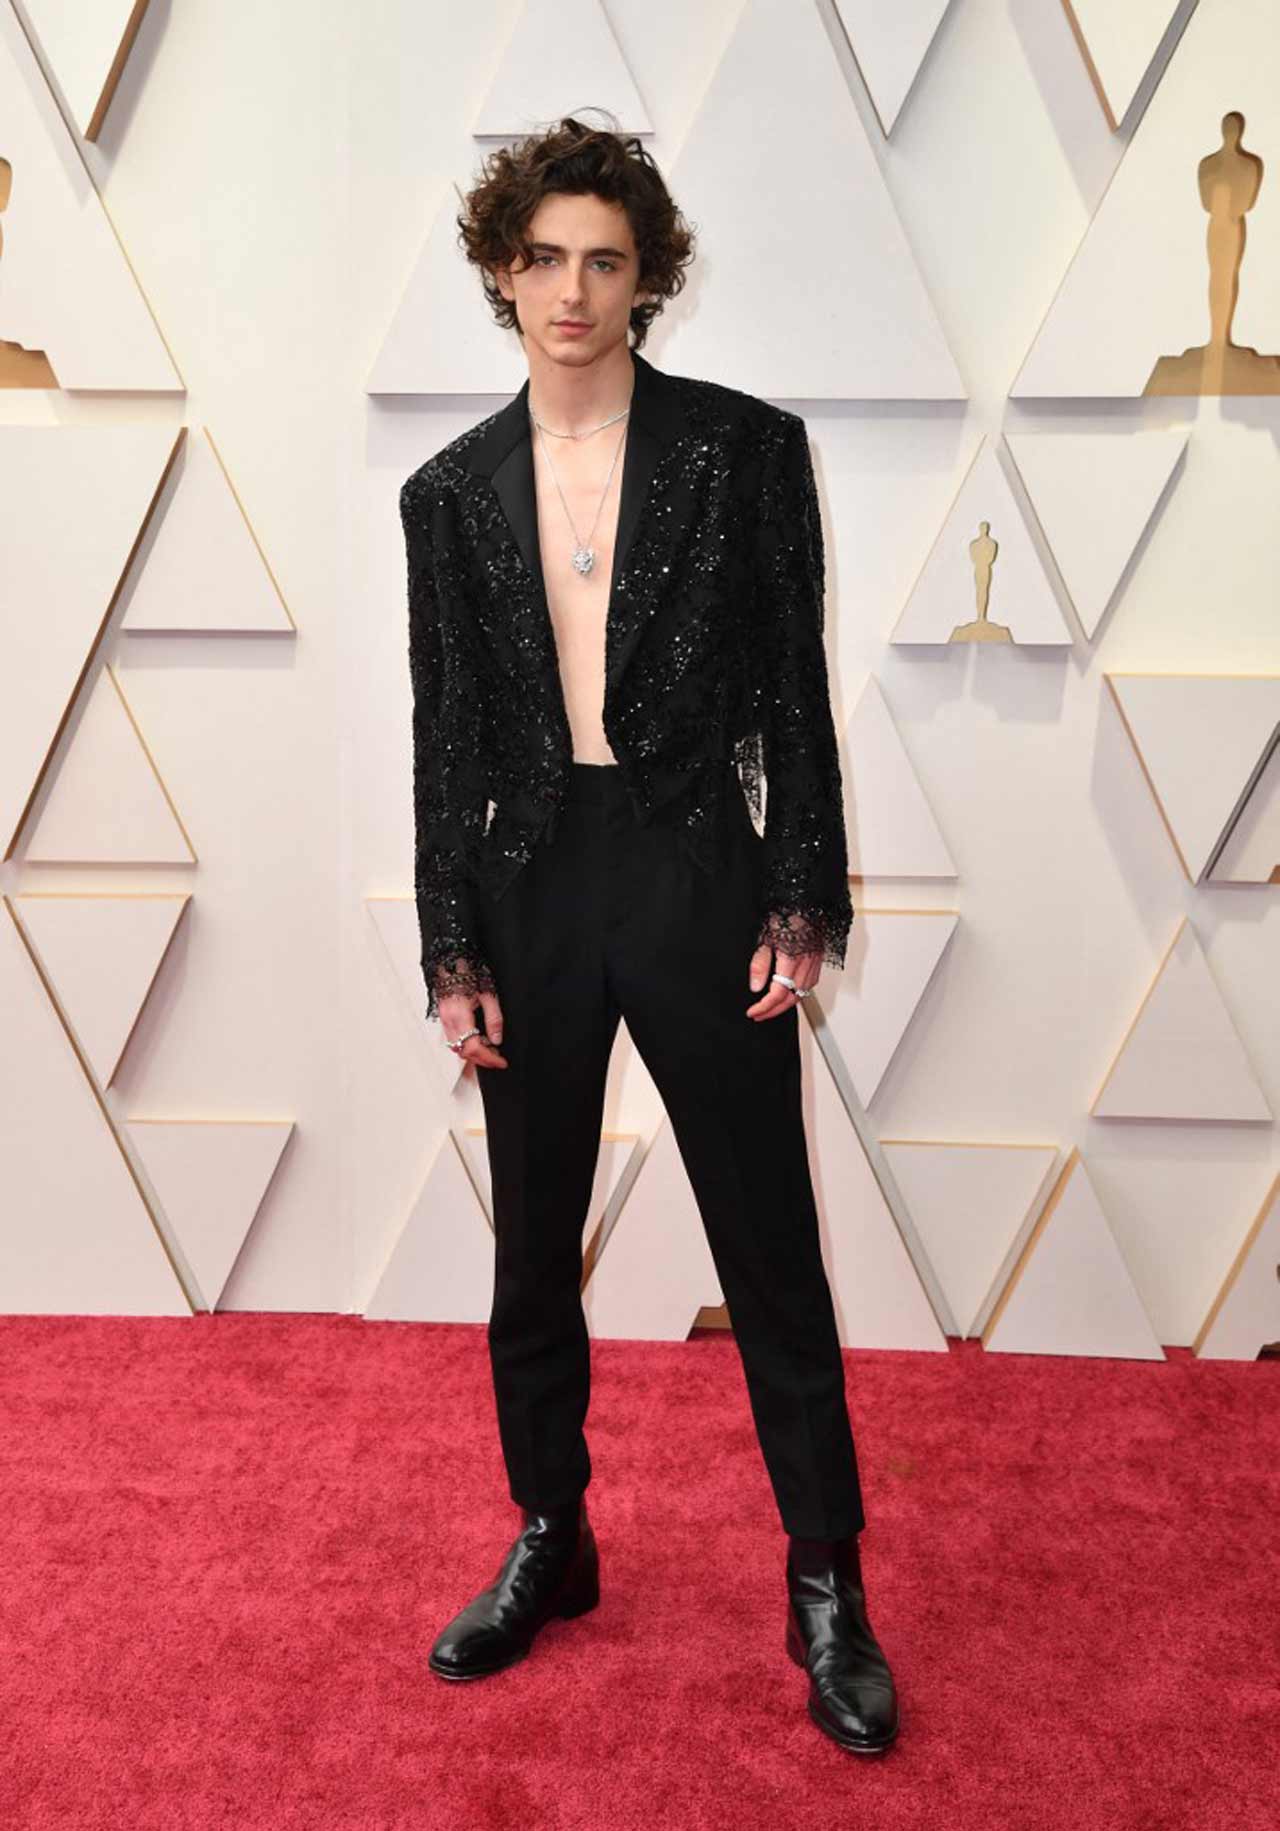 Timothee Chalamet looked dapper as he arrived wearing a sparkling, lace-trimmed Louis Vuitton tux with Cartier gems.